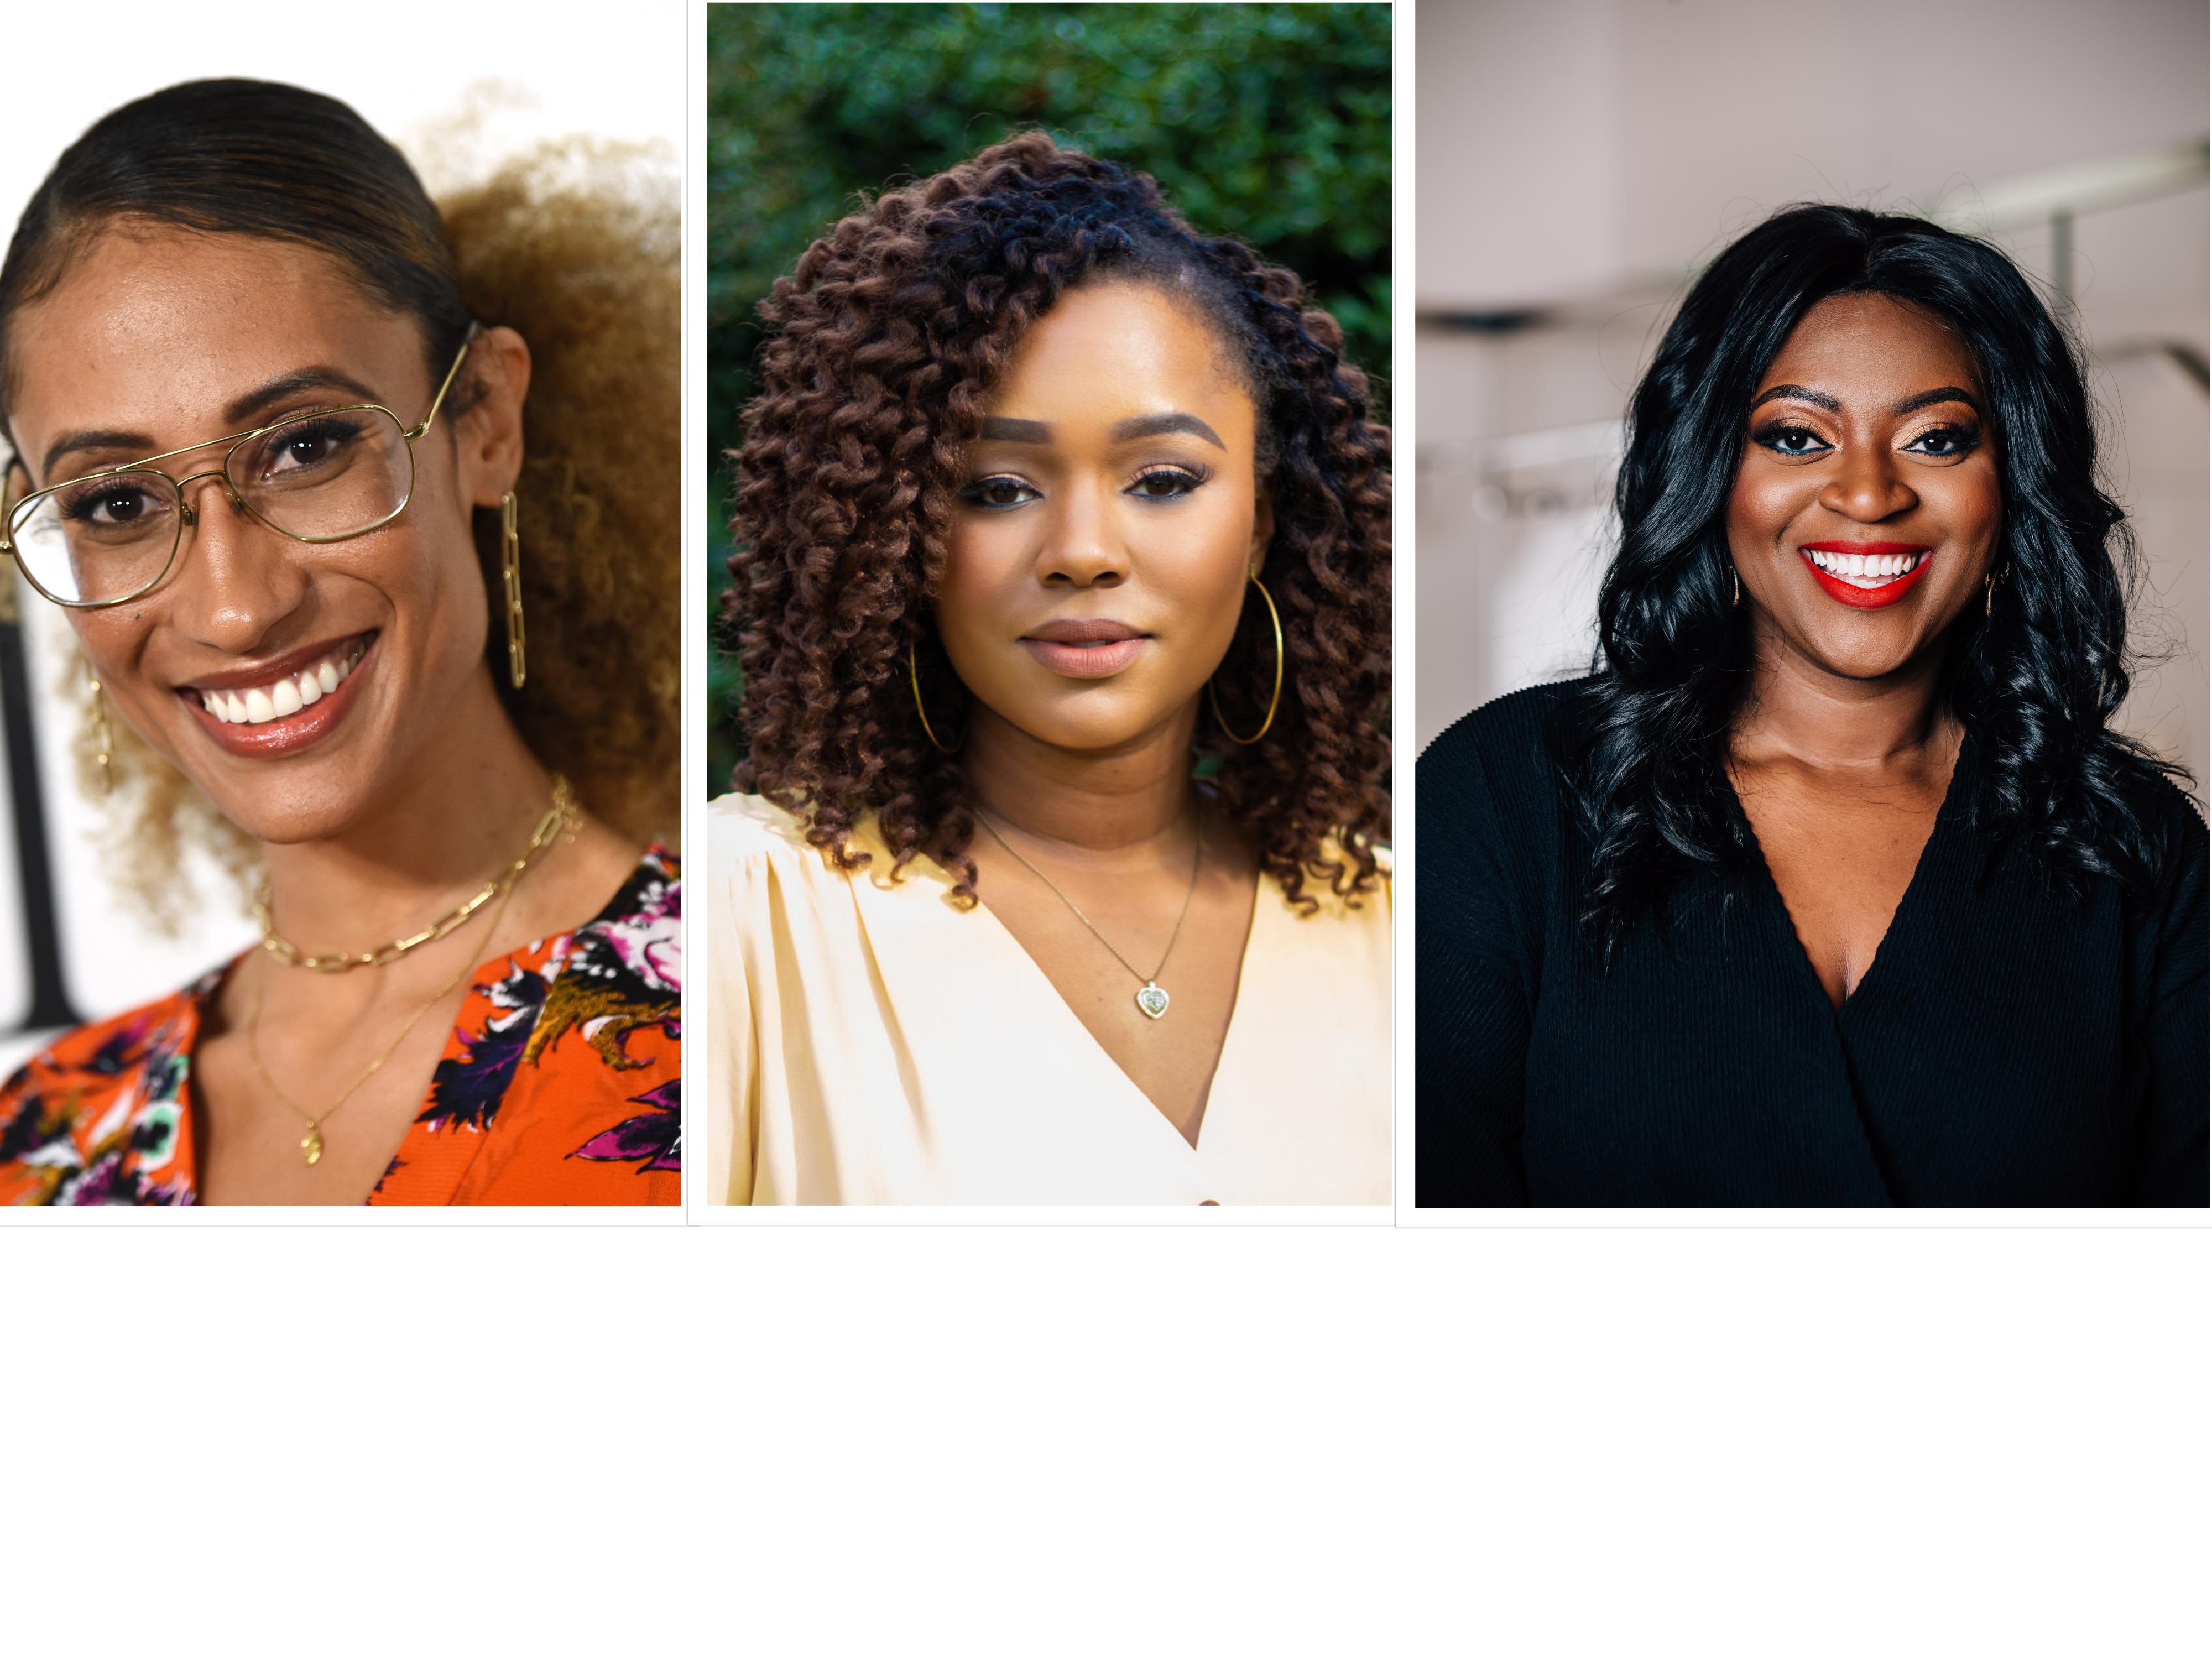 5 black women discuss solutions for